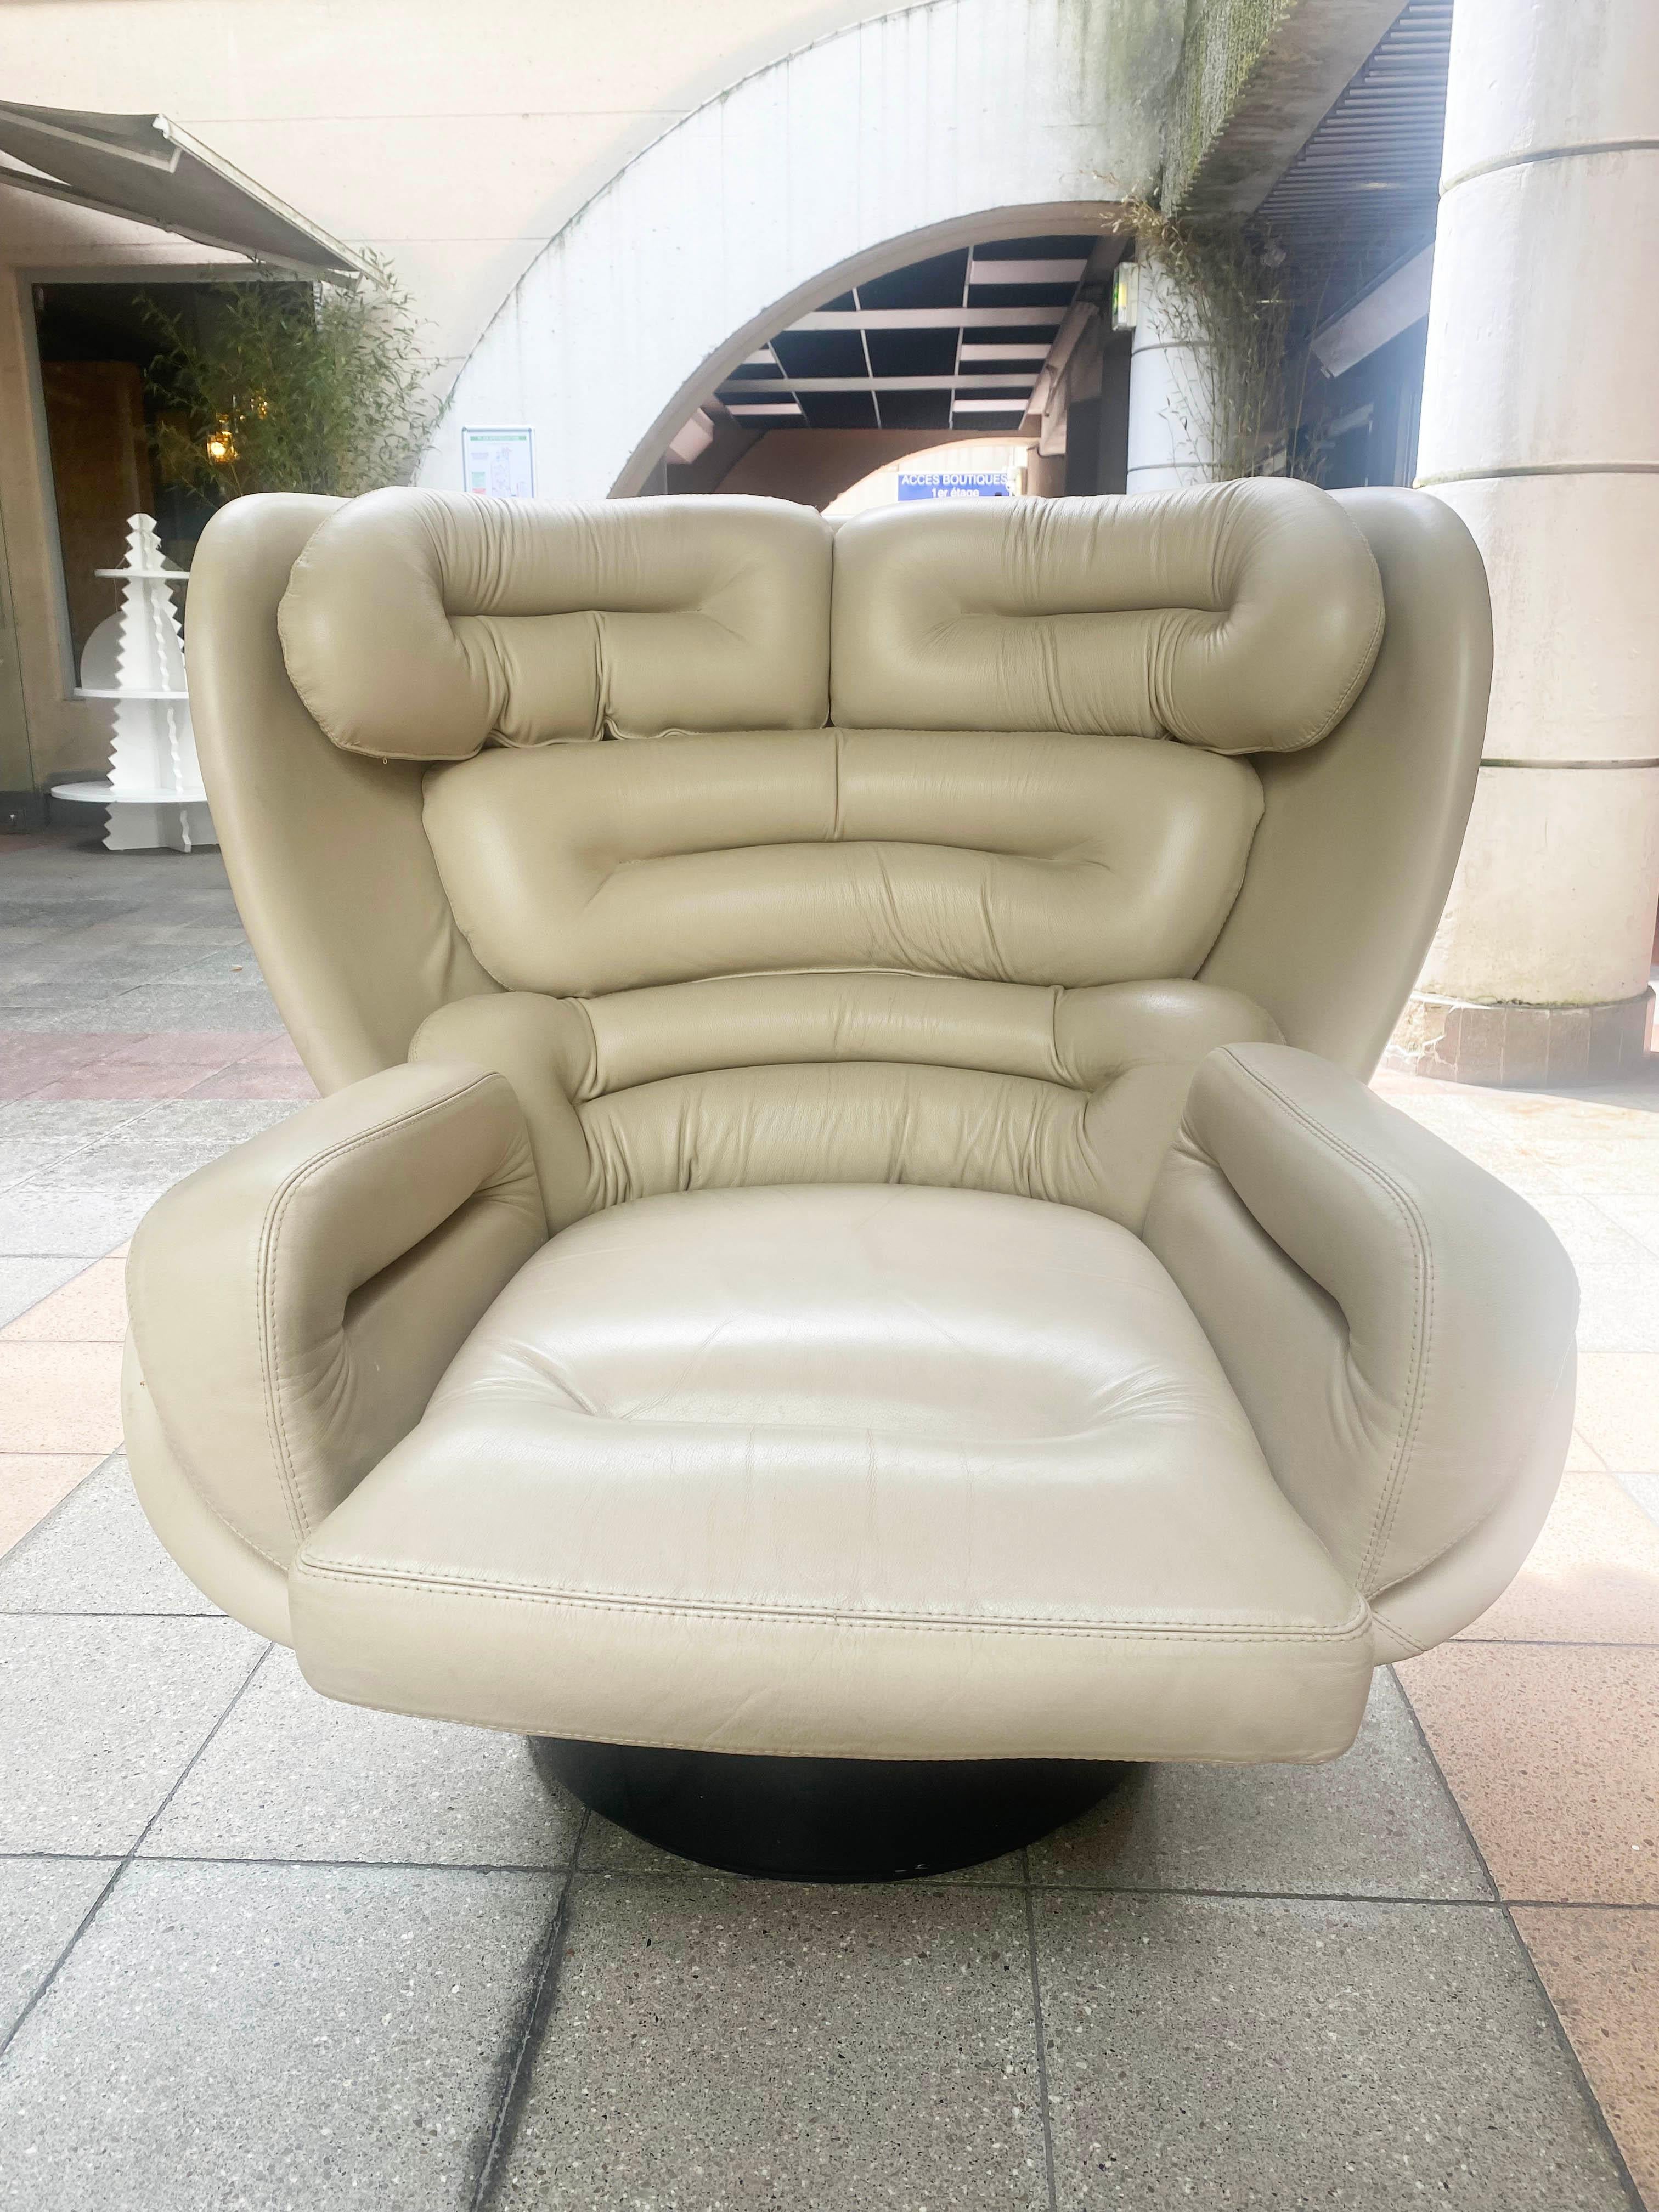 Joe Colombo 
Elda mythical armchair 
Comfort edition 
1972
Black fibreglass shell / smooth ivory leather 
Very good condition 
H 92 x W 94 x D 100 cms 
11900 euros 